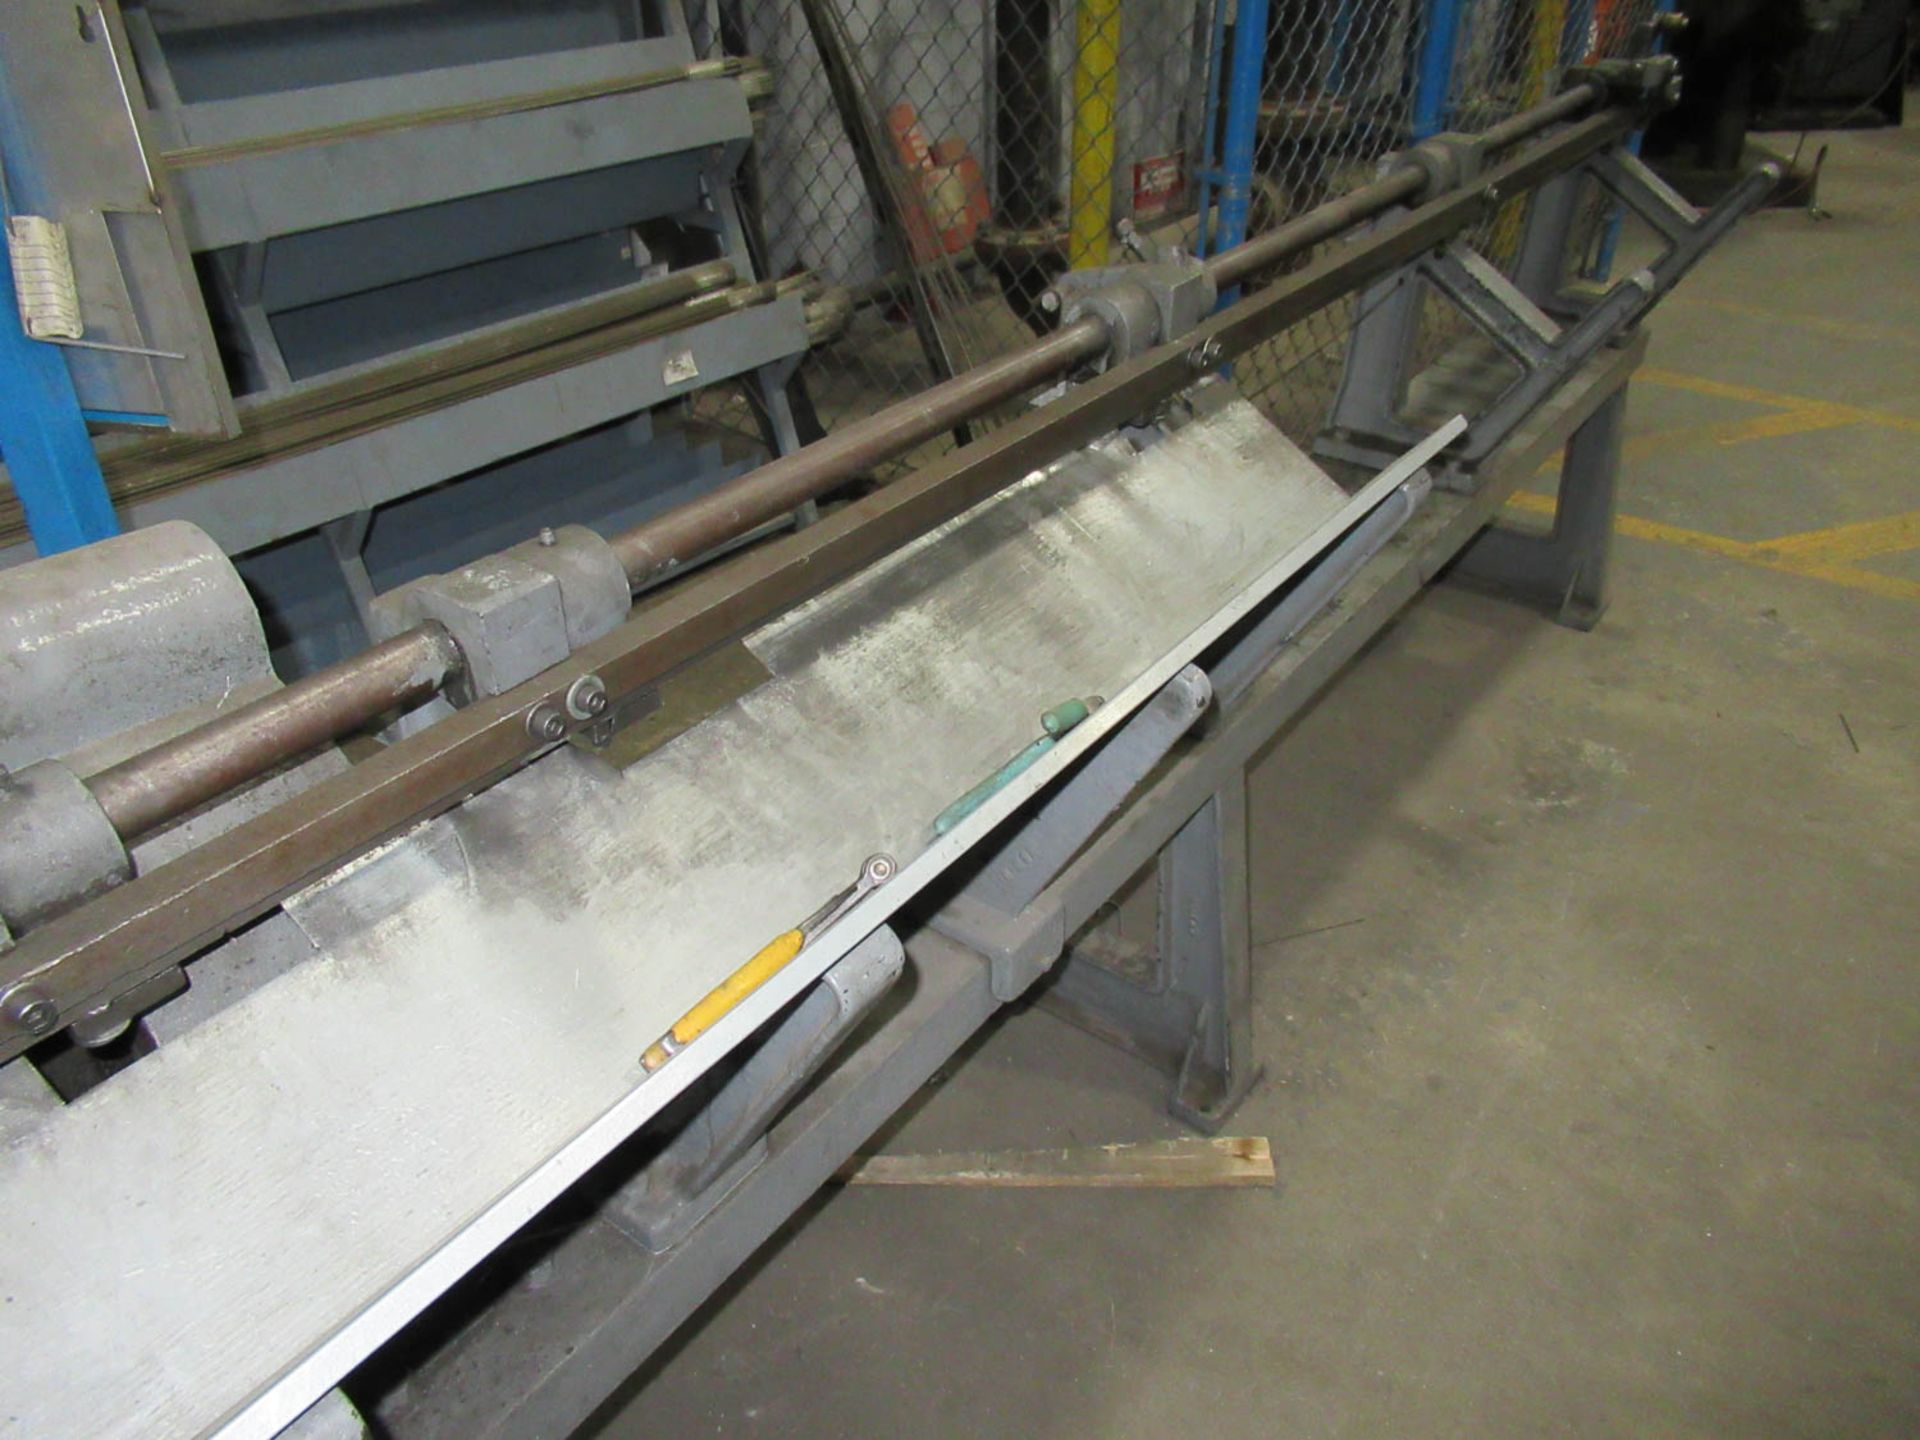 SHUSTER MDL. AWS&C WIRE STRAIGHTENER AND CUT-OFF, 7' RUN-OUT, WITH ASSORTED DIES, S/N: 1A-112 - Image 4 of 6